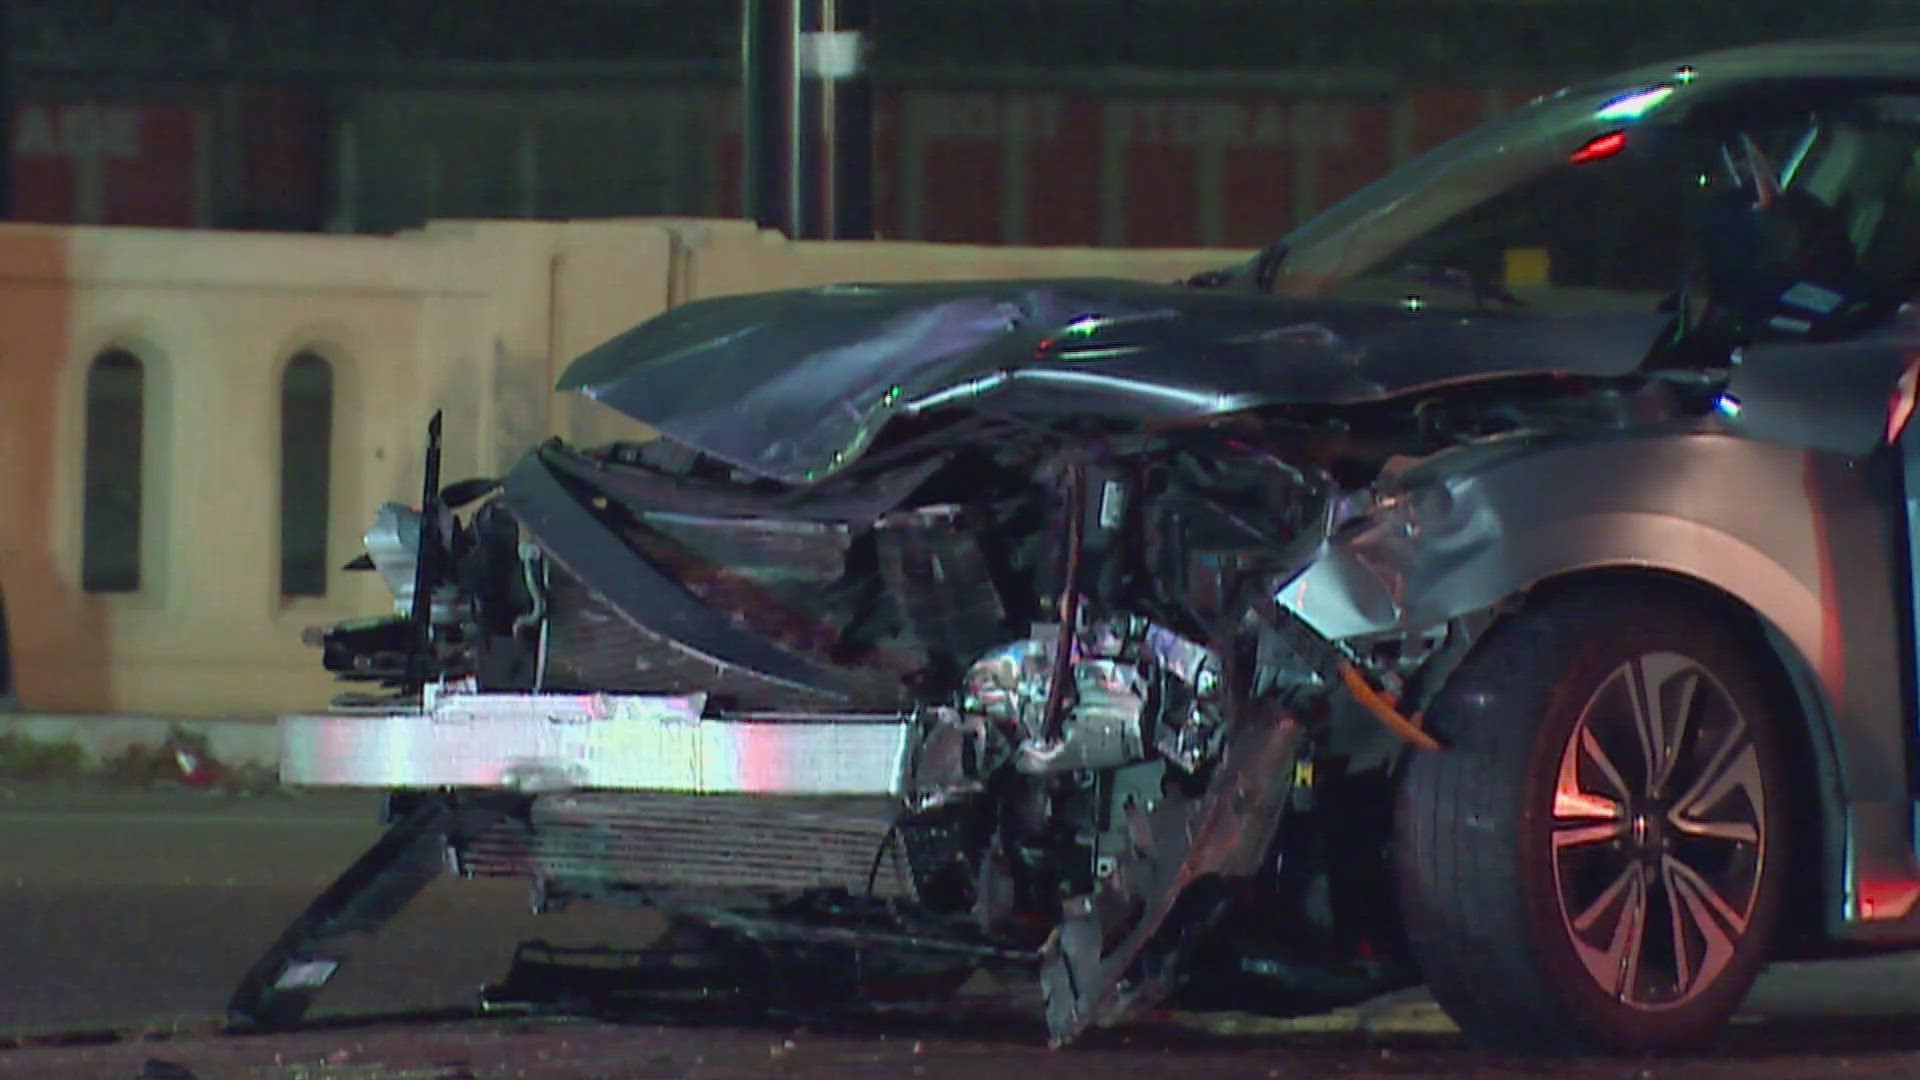 The crash happened Wednesday night on westbound Loop 820 at Haltom ROad.